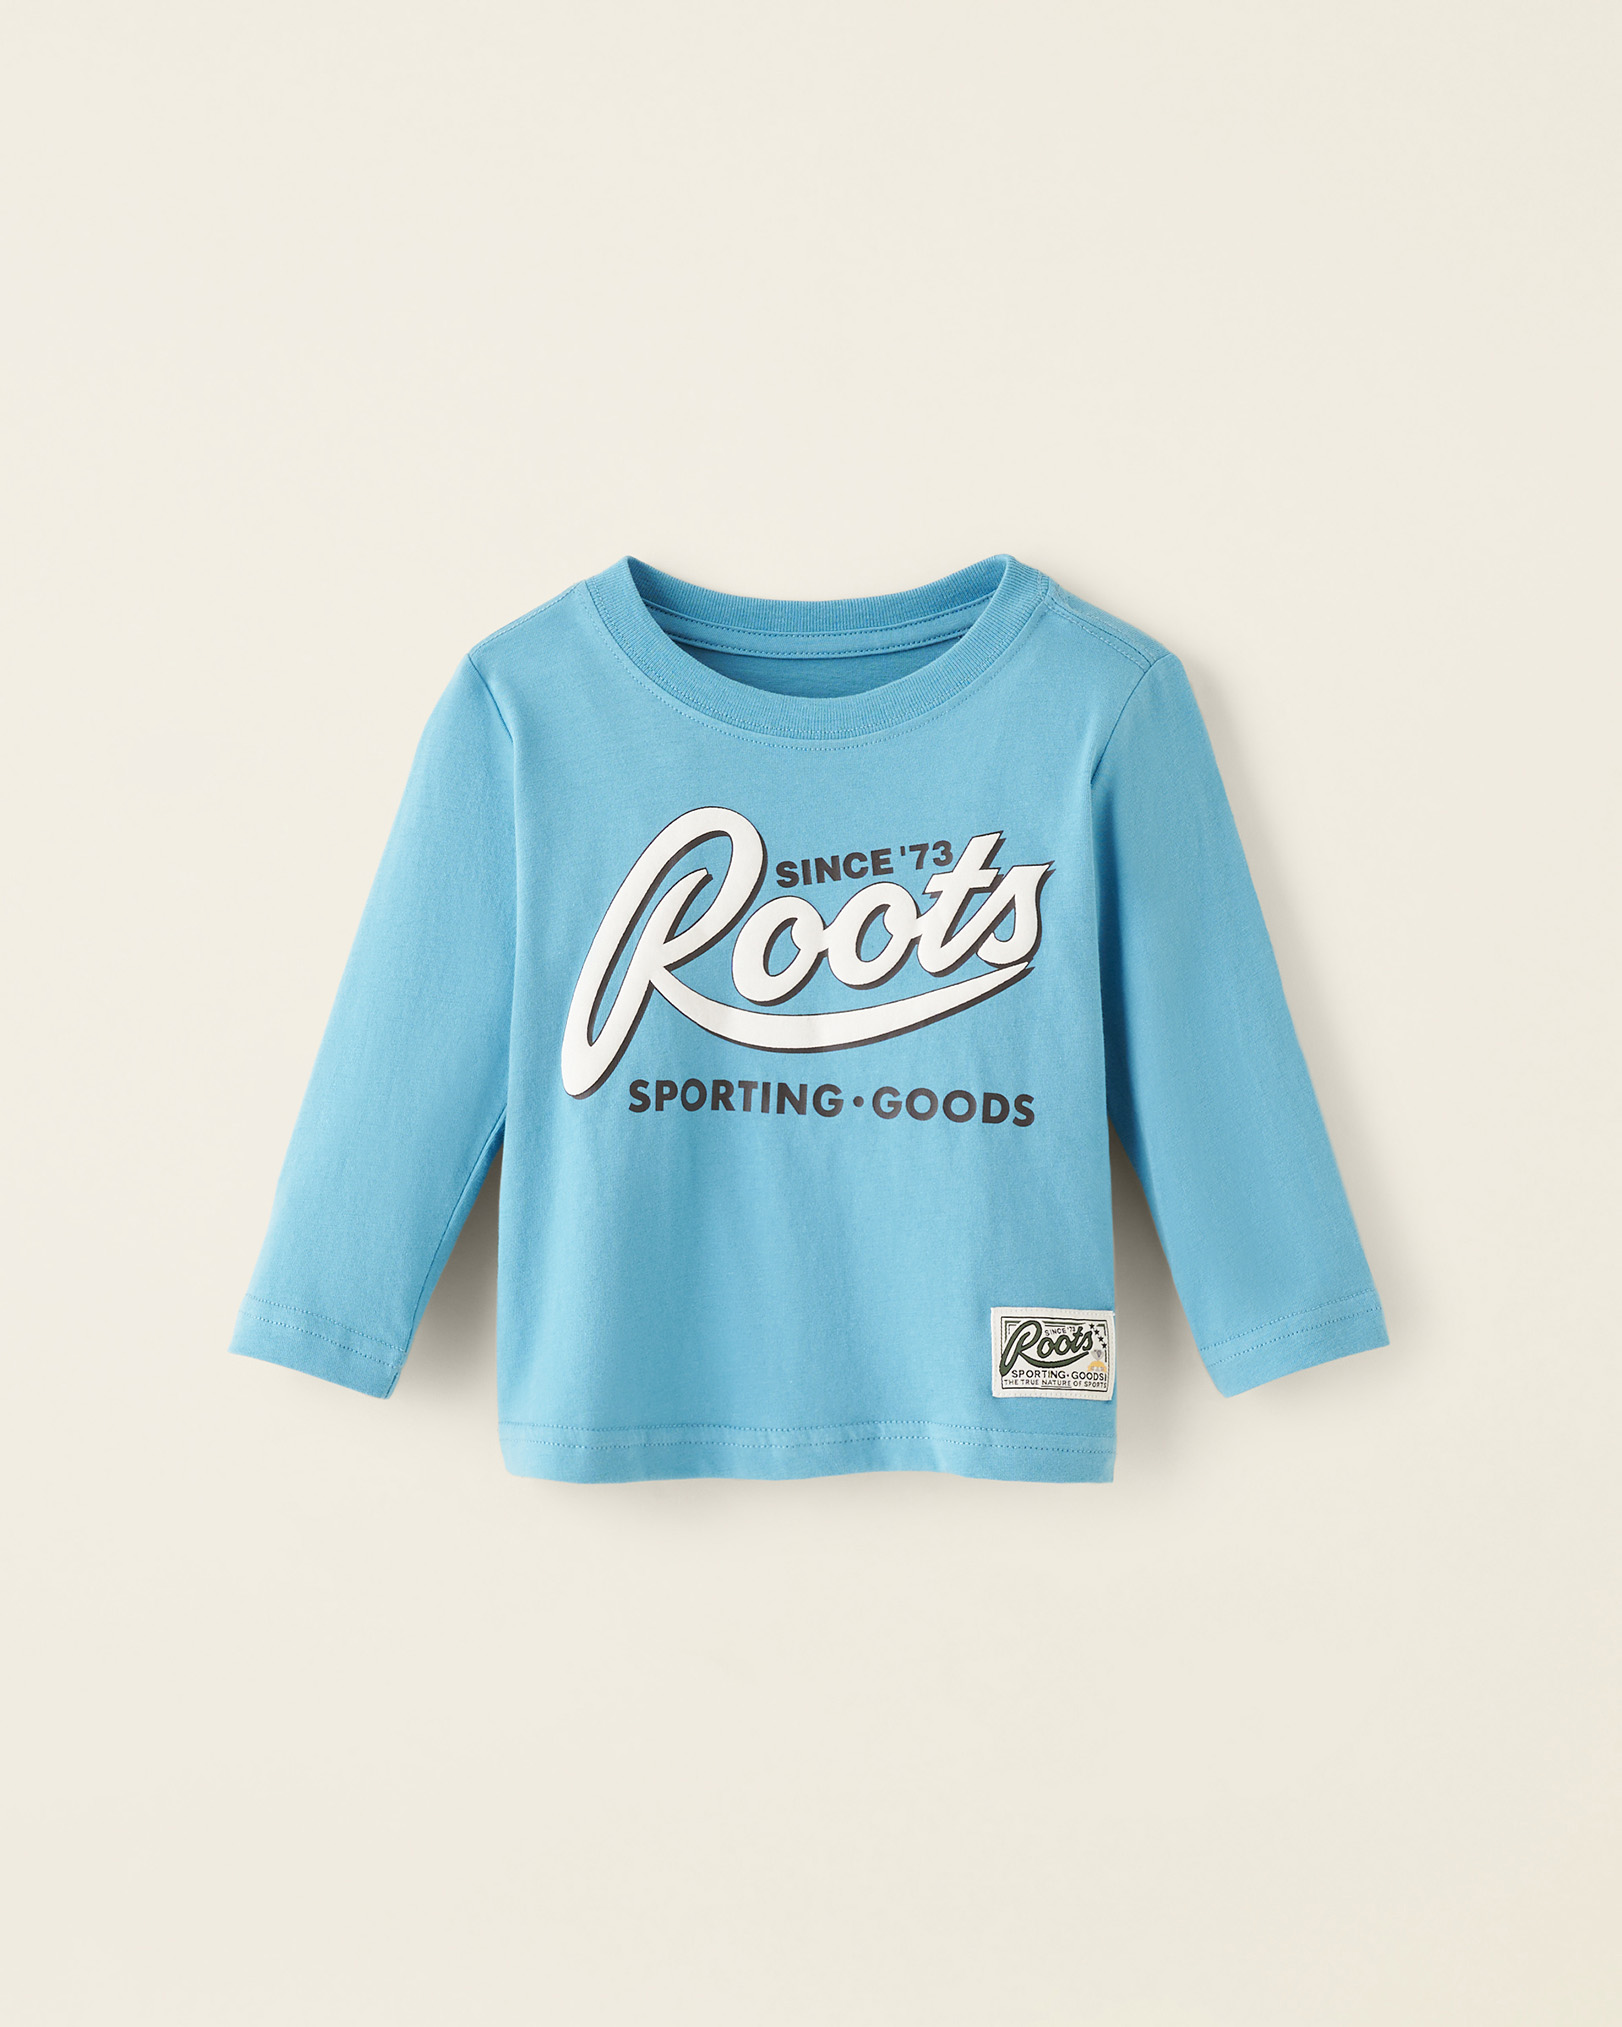 Roots Baby Sporting Goods T-Shirt in Niagara Blue